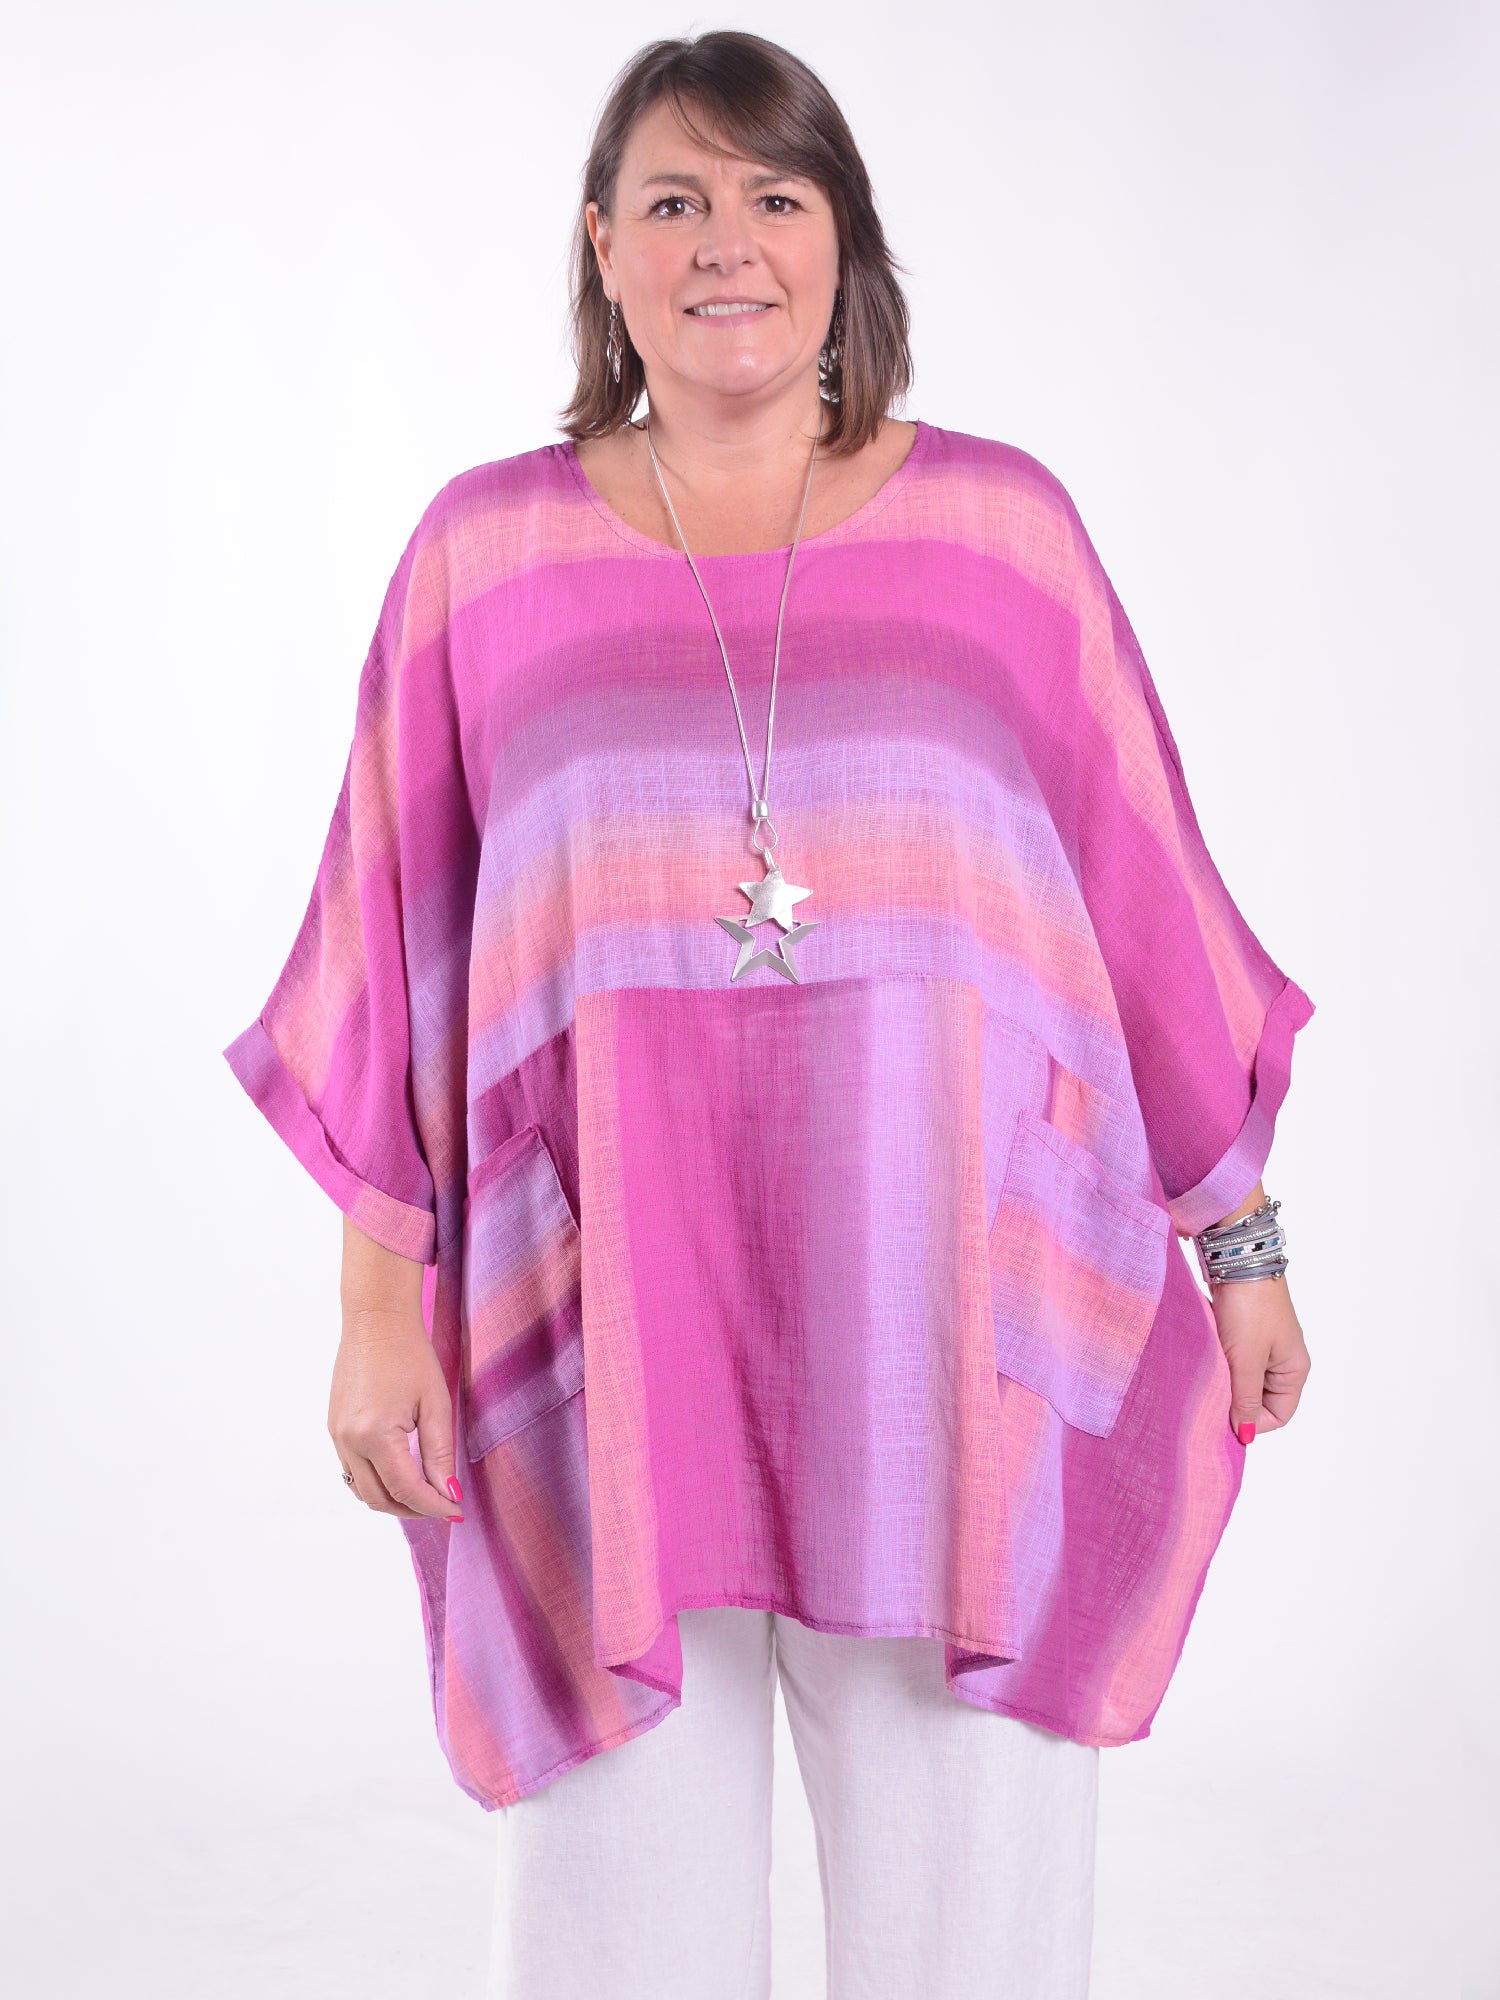 Lagenlook Oversized Cotton Striped Tunic - 10077 STRIPE, Tops & Shirts, Pure Plus Clothing, Lagenlook Clothing, Plus Size Fashion, Over 50 Fashion